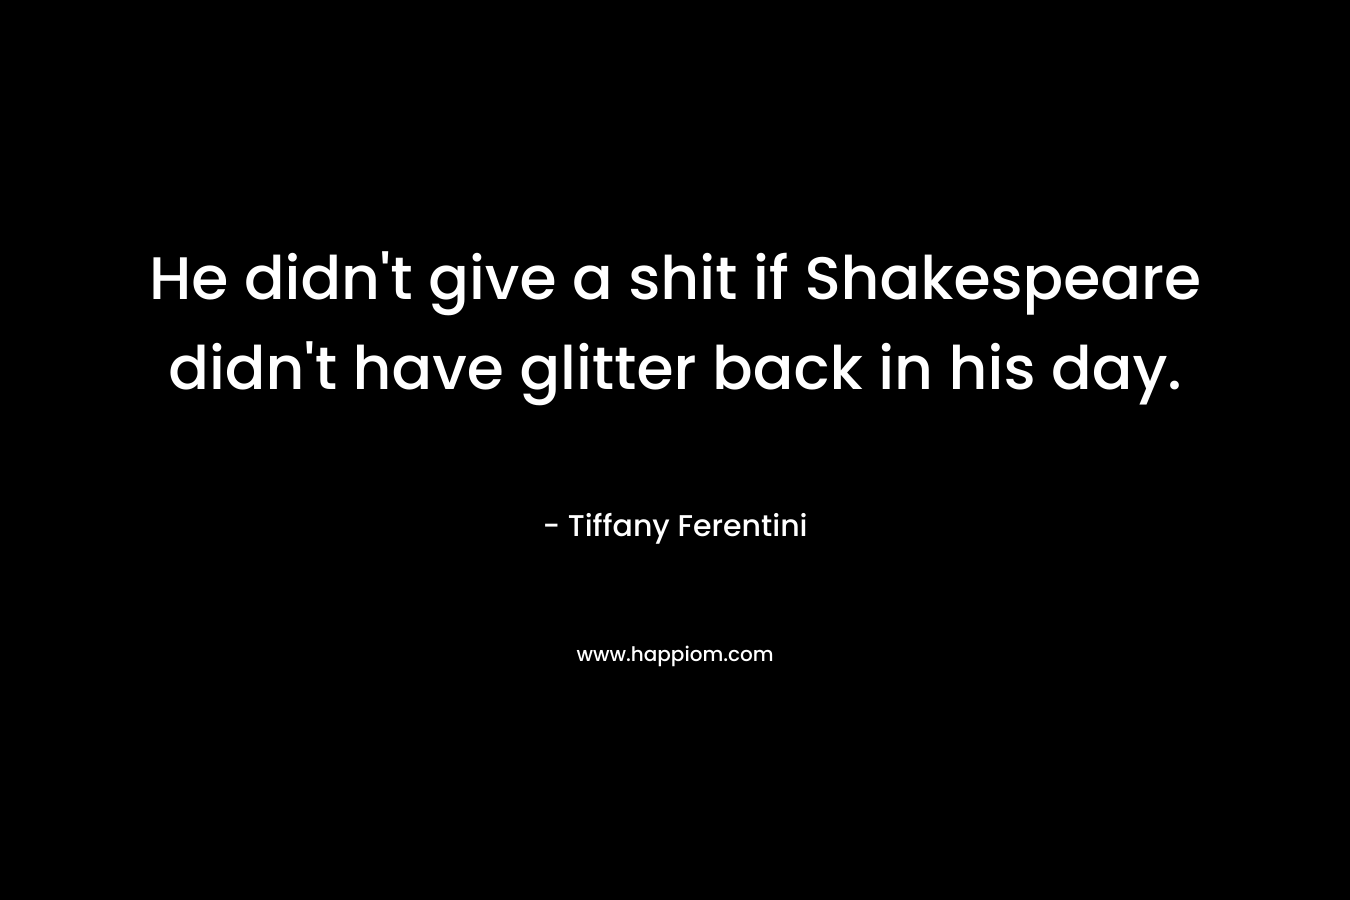 He didn’t give a shit if Shakespeare didn’t have glitter back in his day. – Tiffany Ferentini